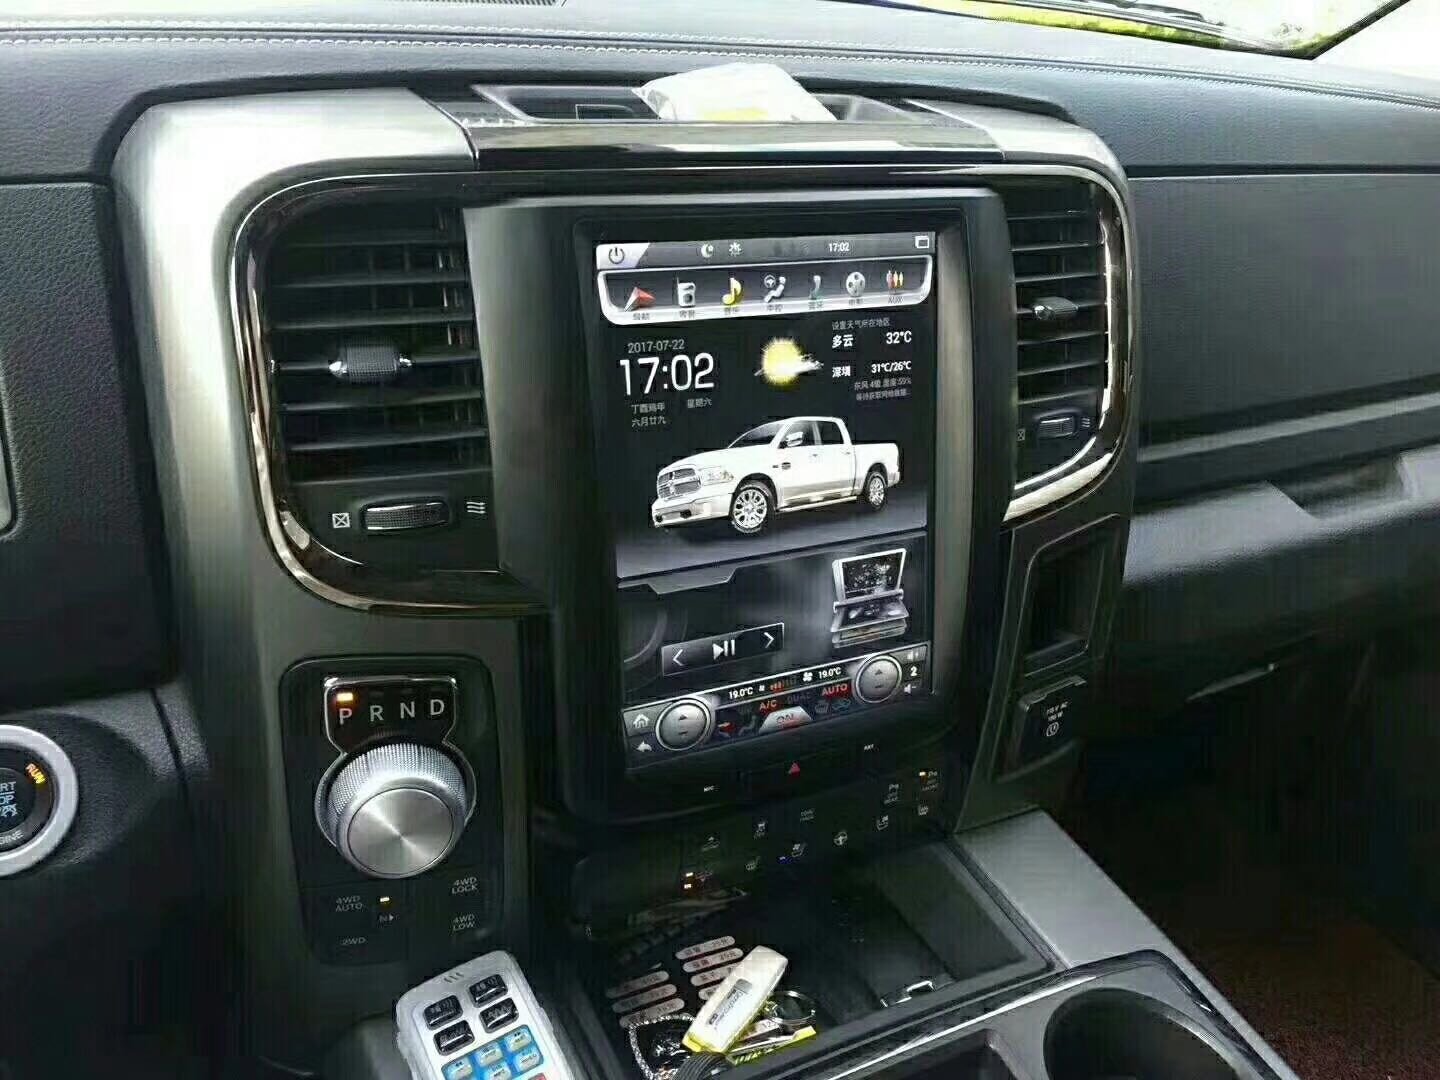 [Open box] 10.4" Android Vertical Screen 3 button Navi Radio for Dodge Ram 2013 - 2018